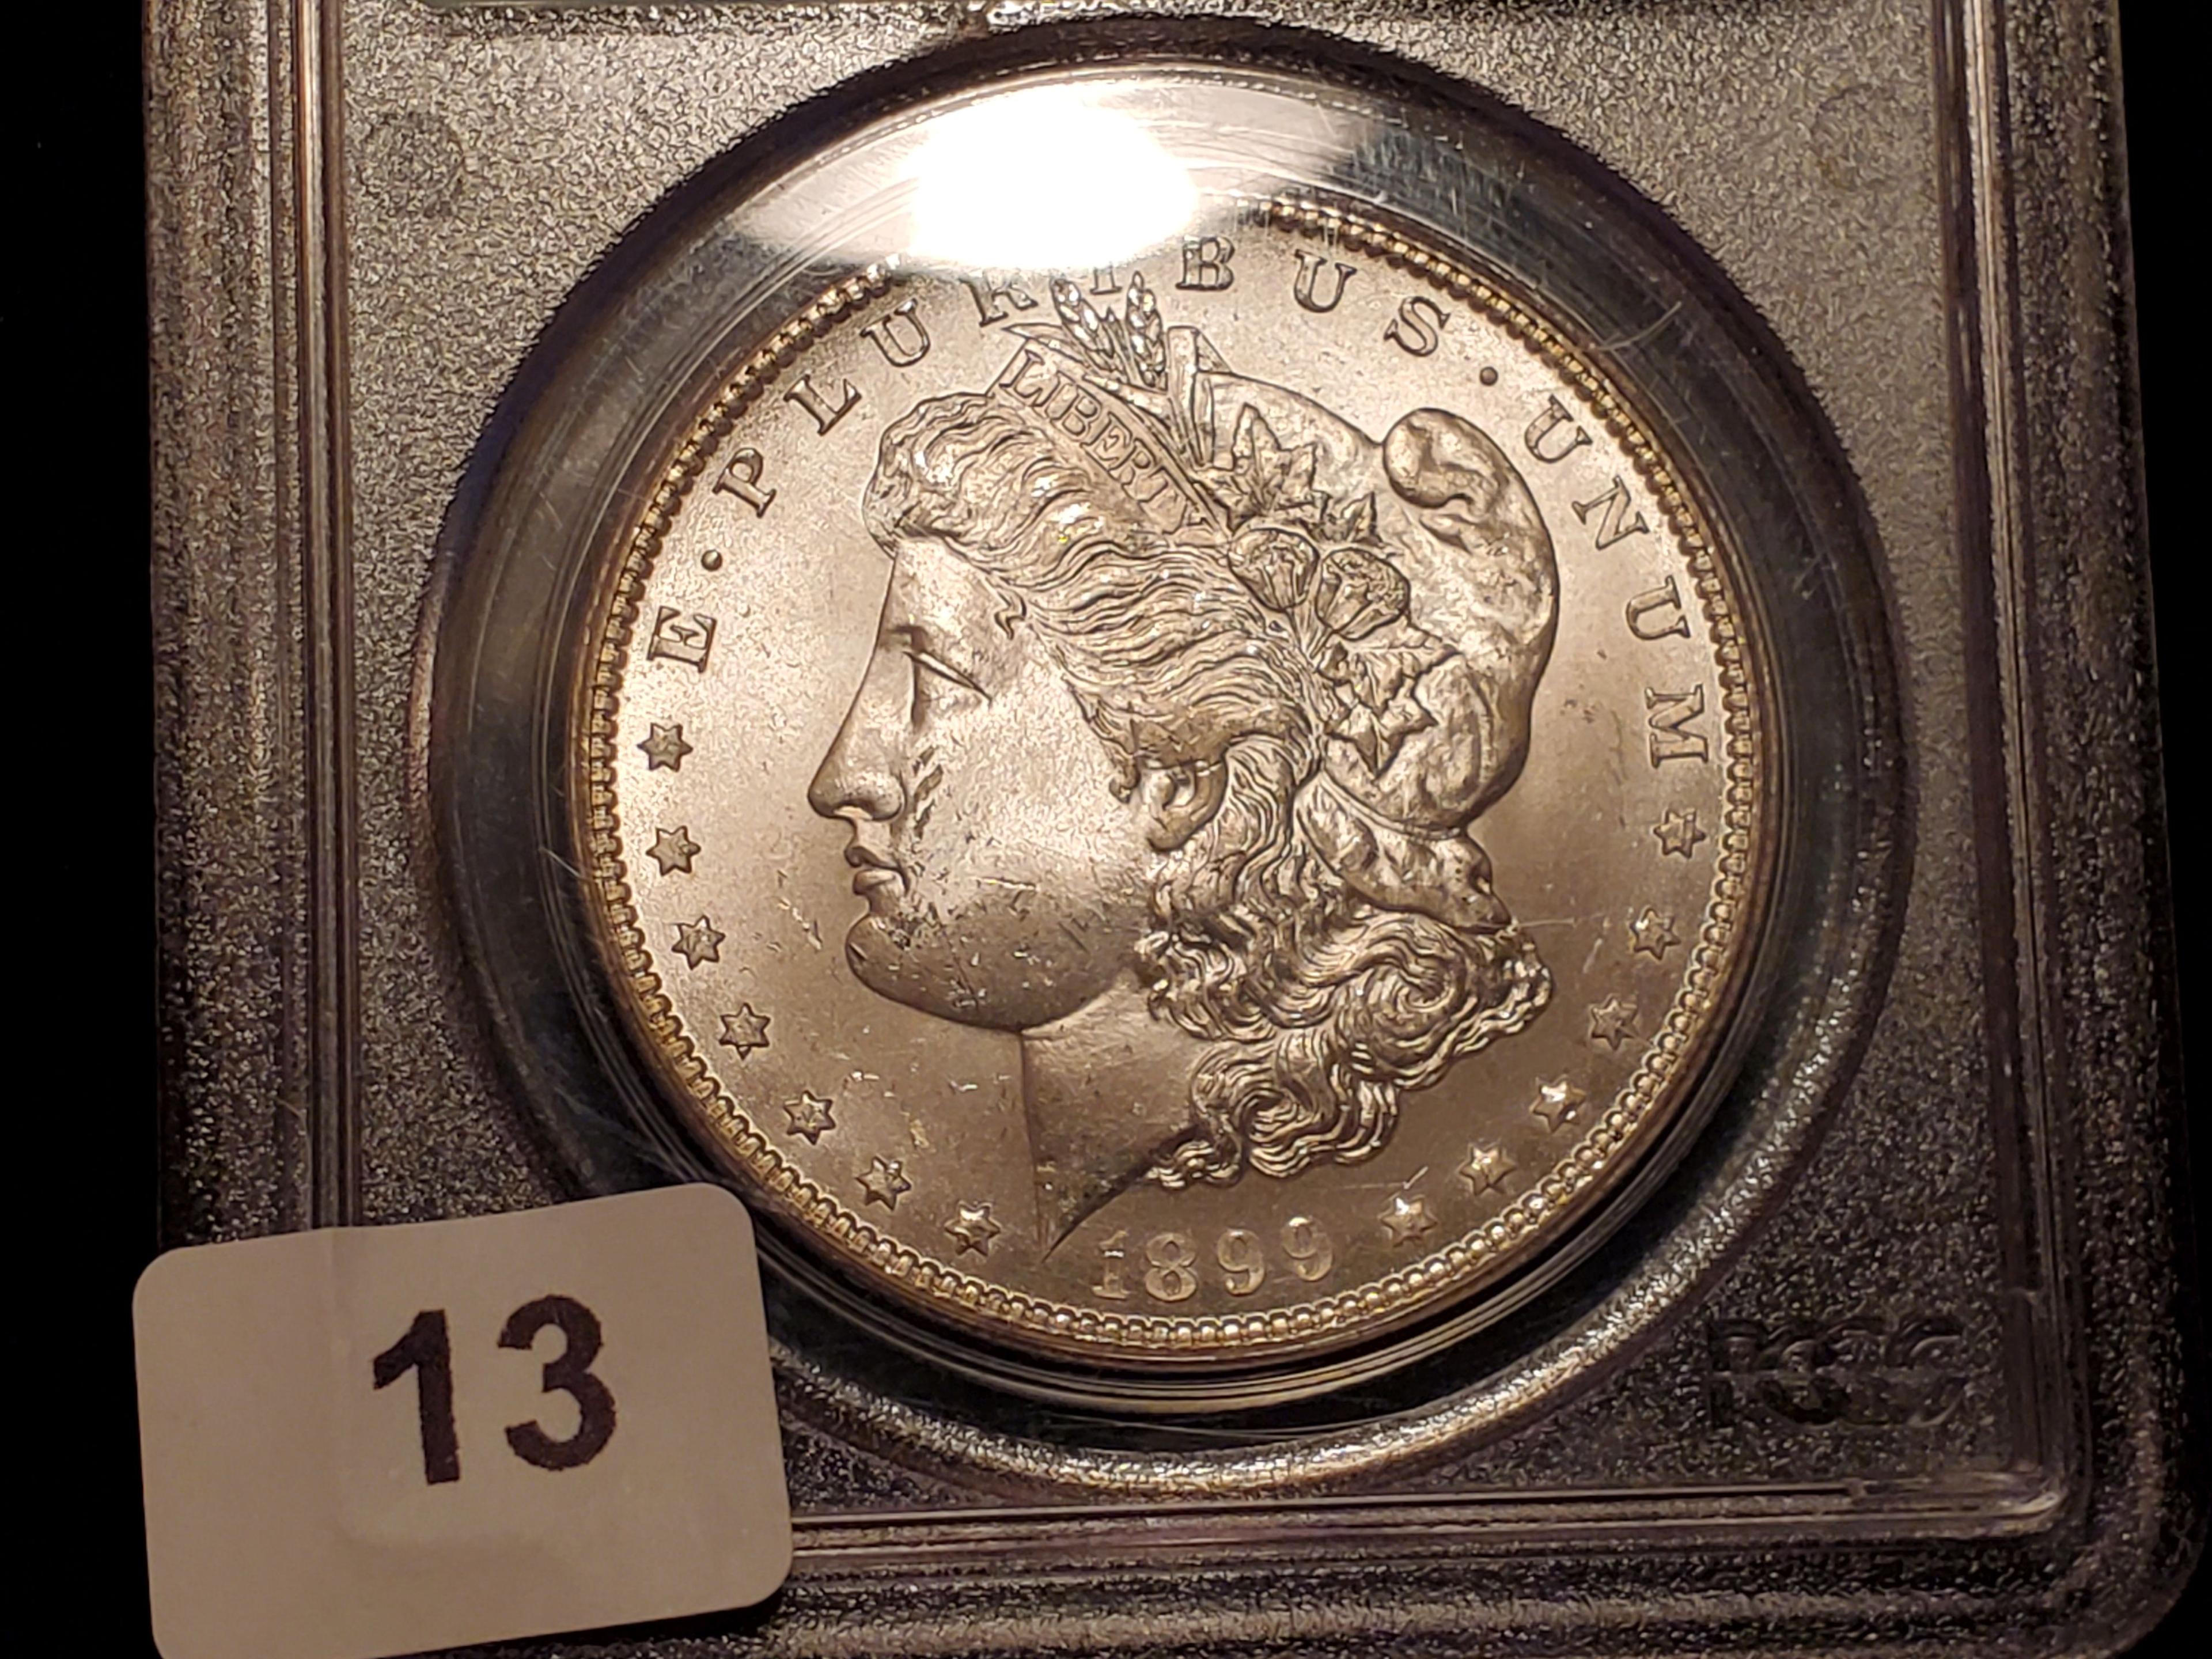 Better Date PCGS 1899-O Morgan Dollar in Mint State 64